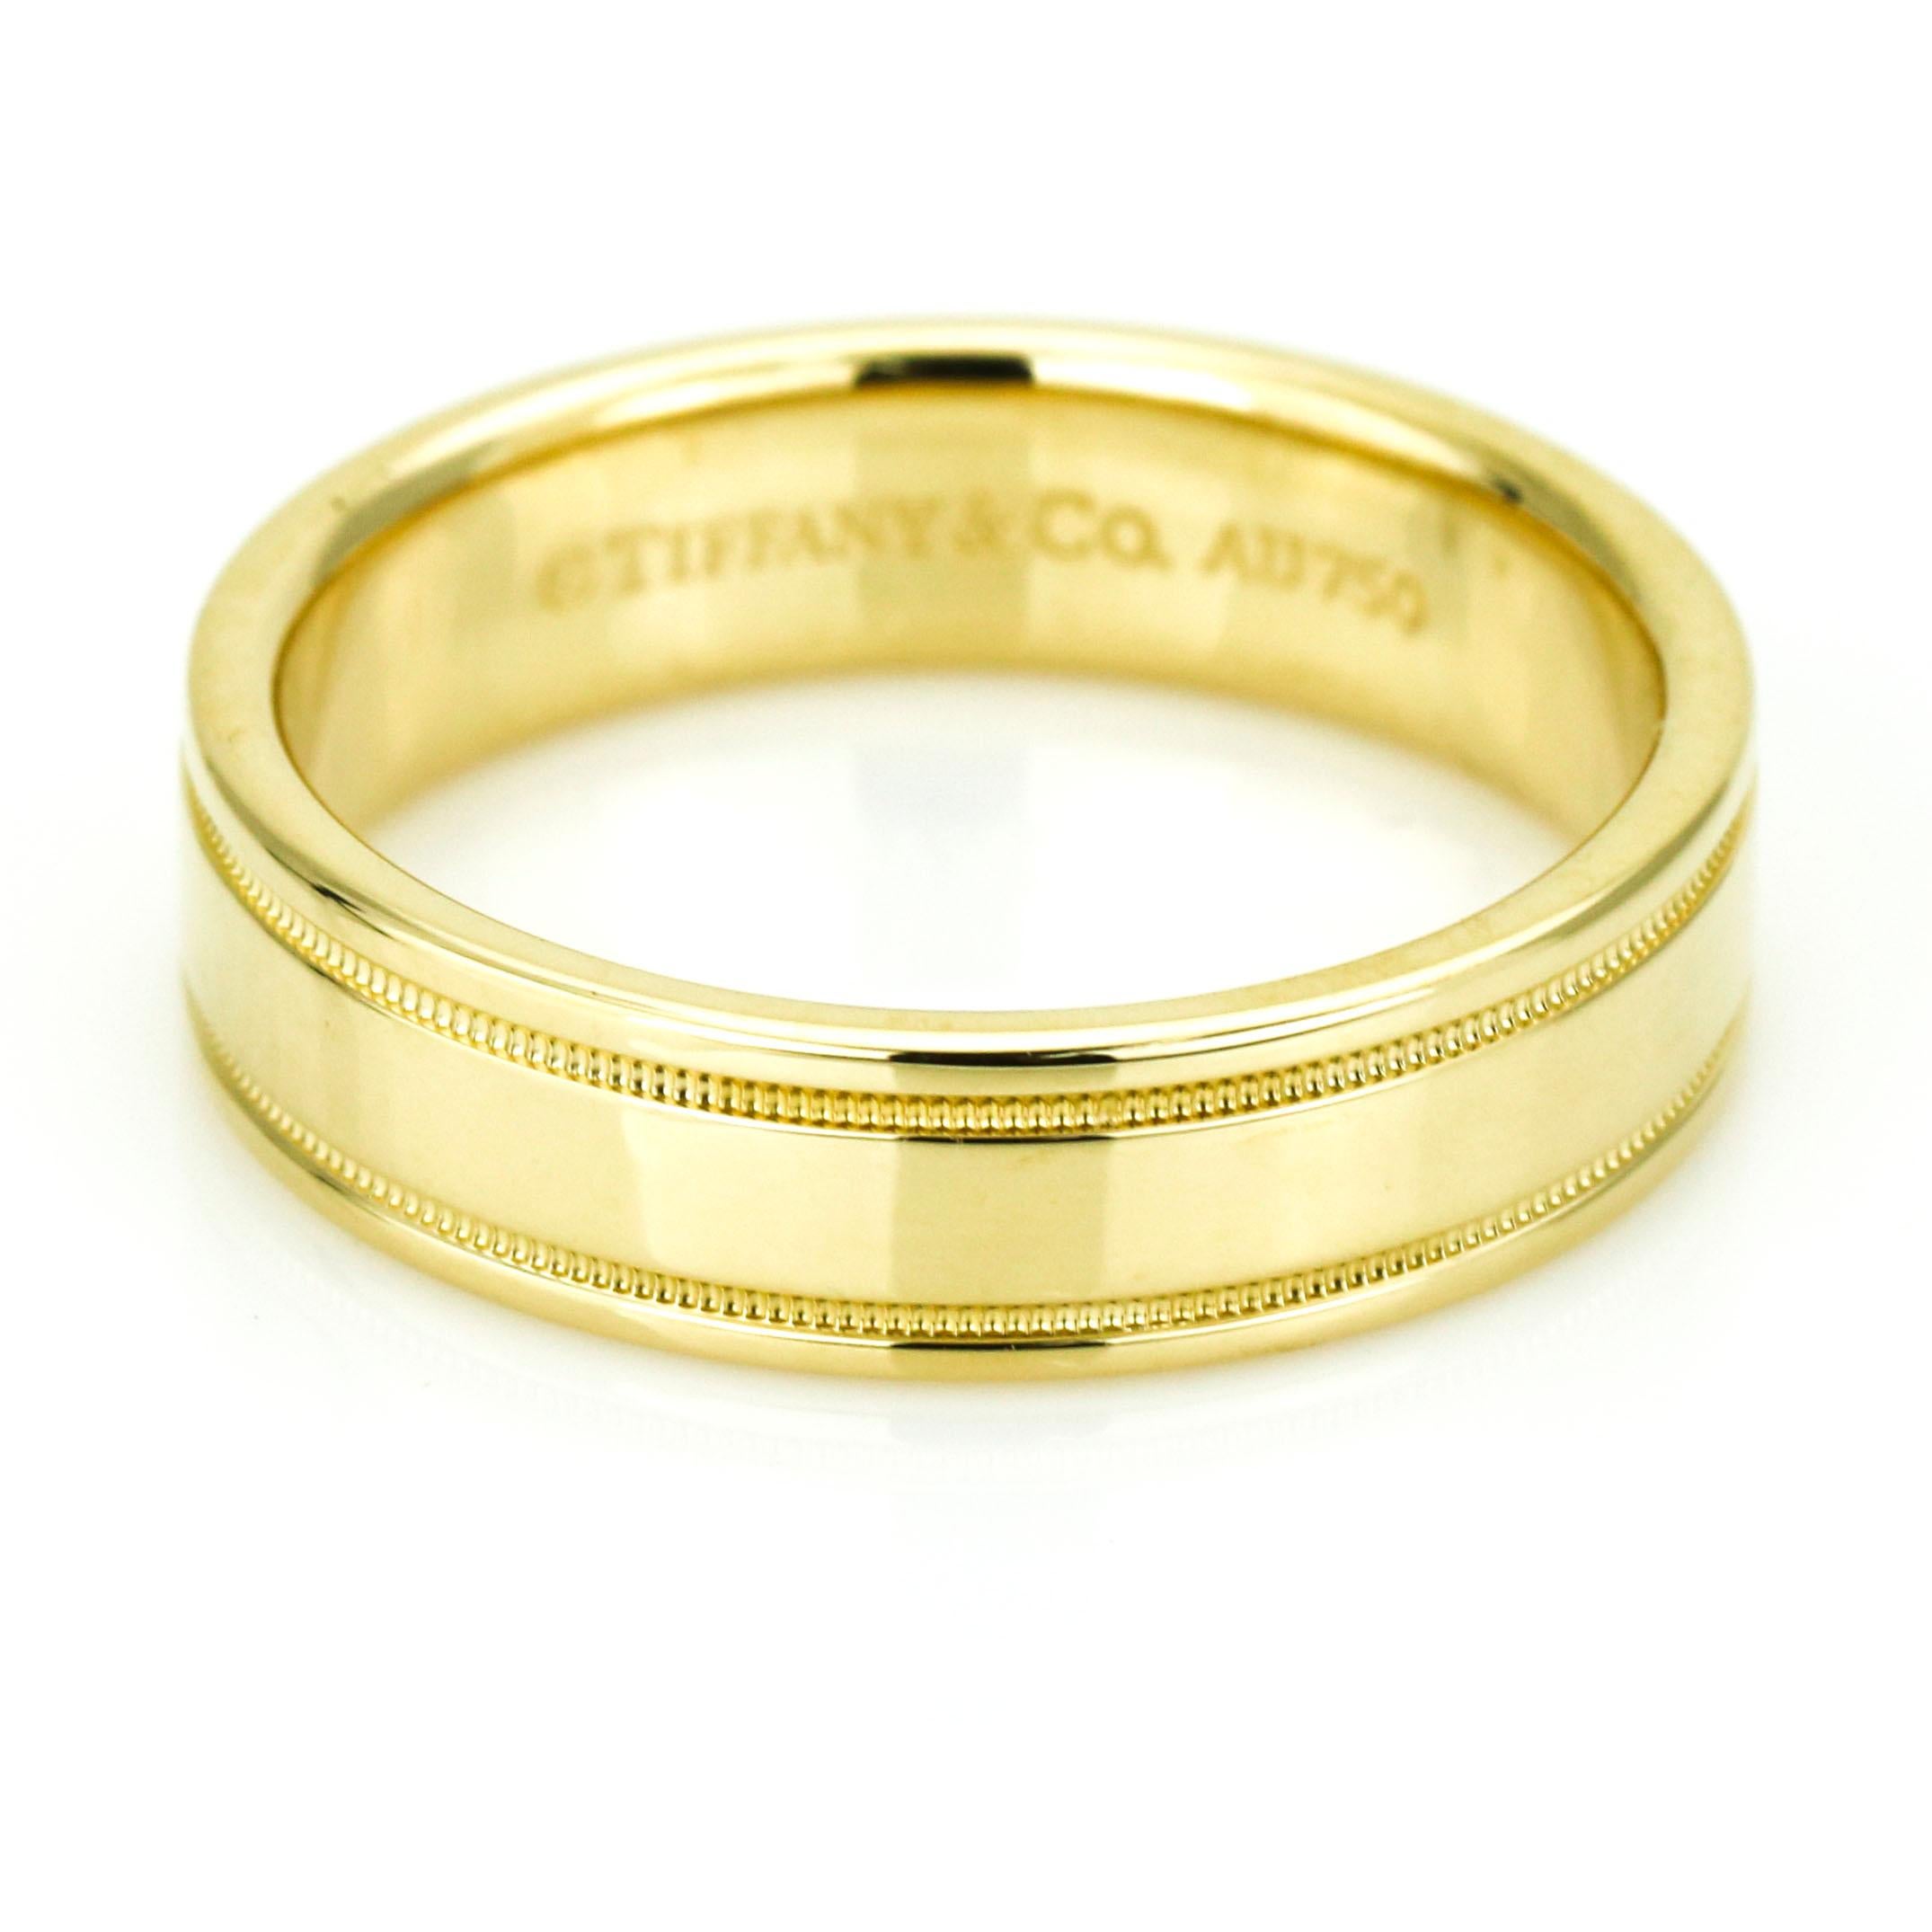 Tiffany & Co. 6mm essential band double milgrain men's ring in 18-karat yellow gold.

Size, 11
Outside Diameter, 24.5mm
Width, 6mm
Depth, 2mm
Weight, 10.84 grams
